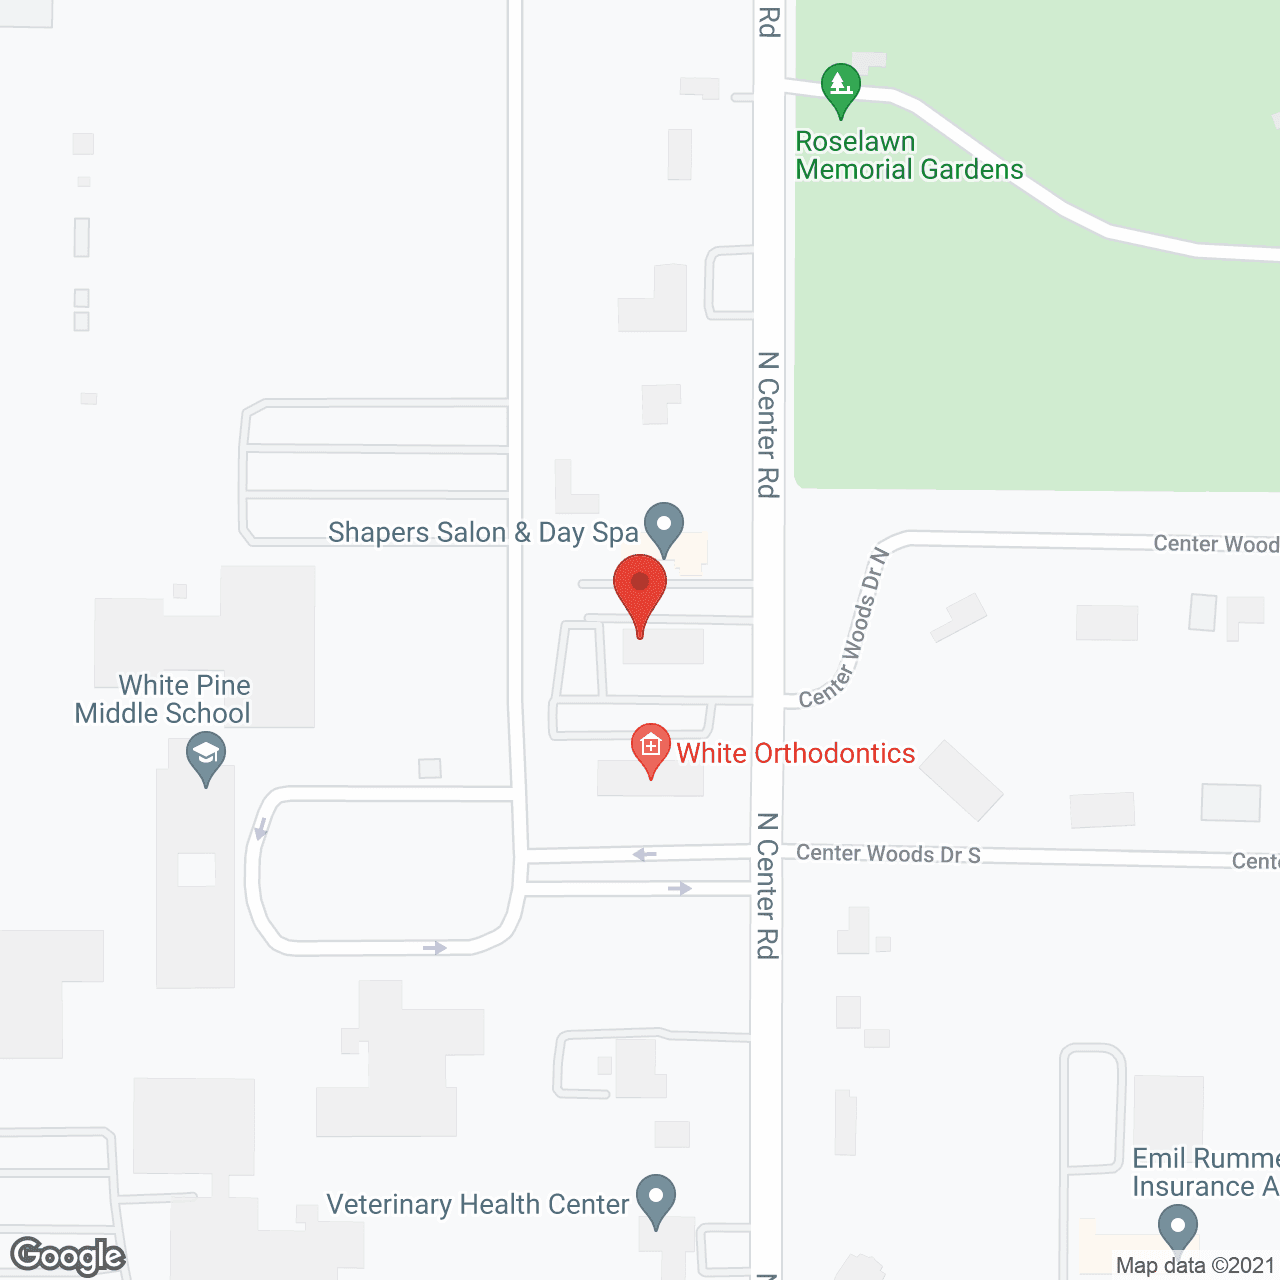 Primary Home Care - Saginaw in google map